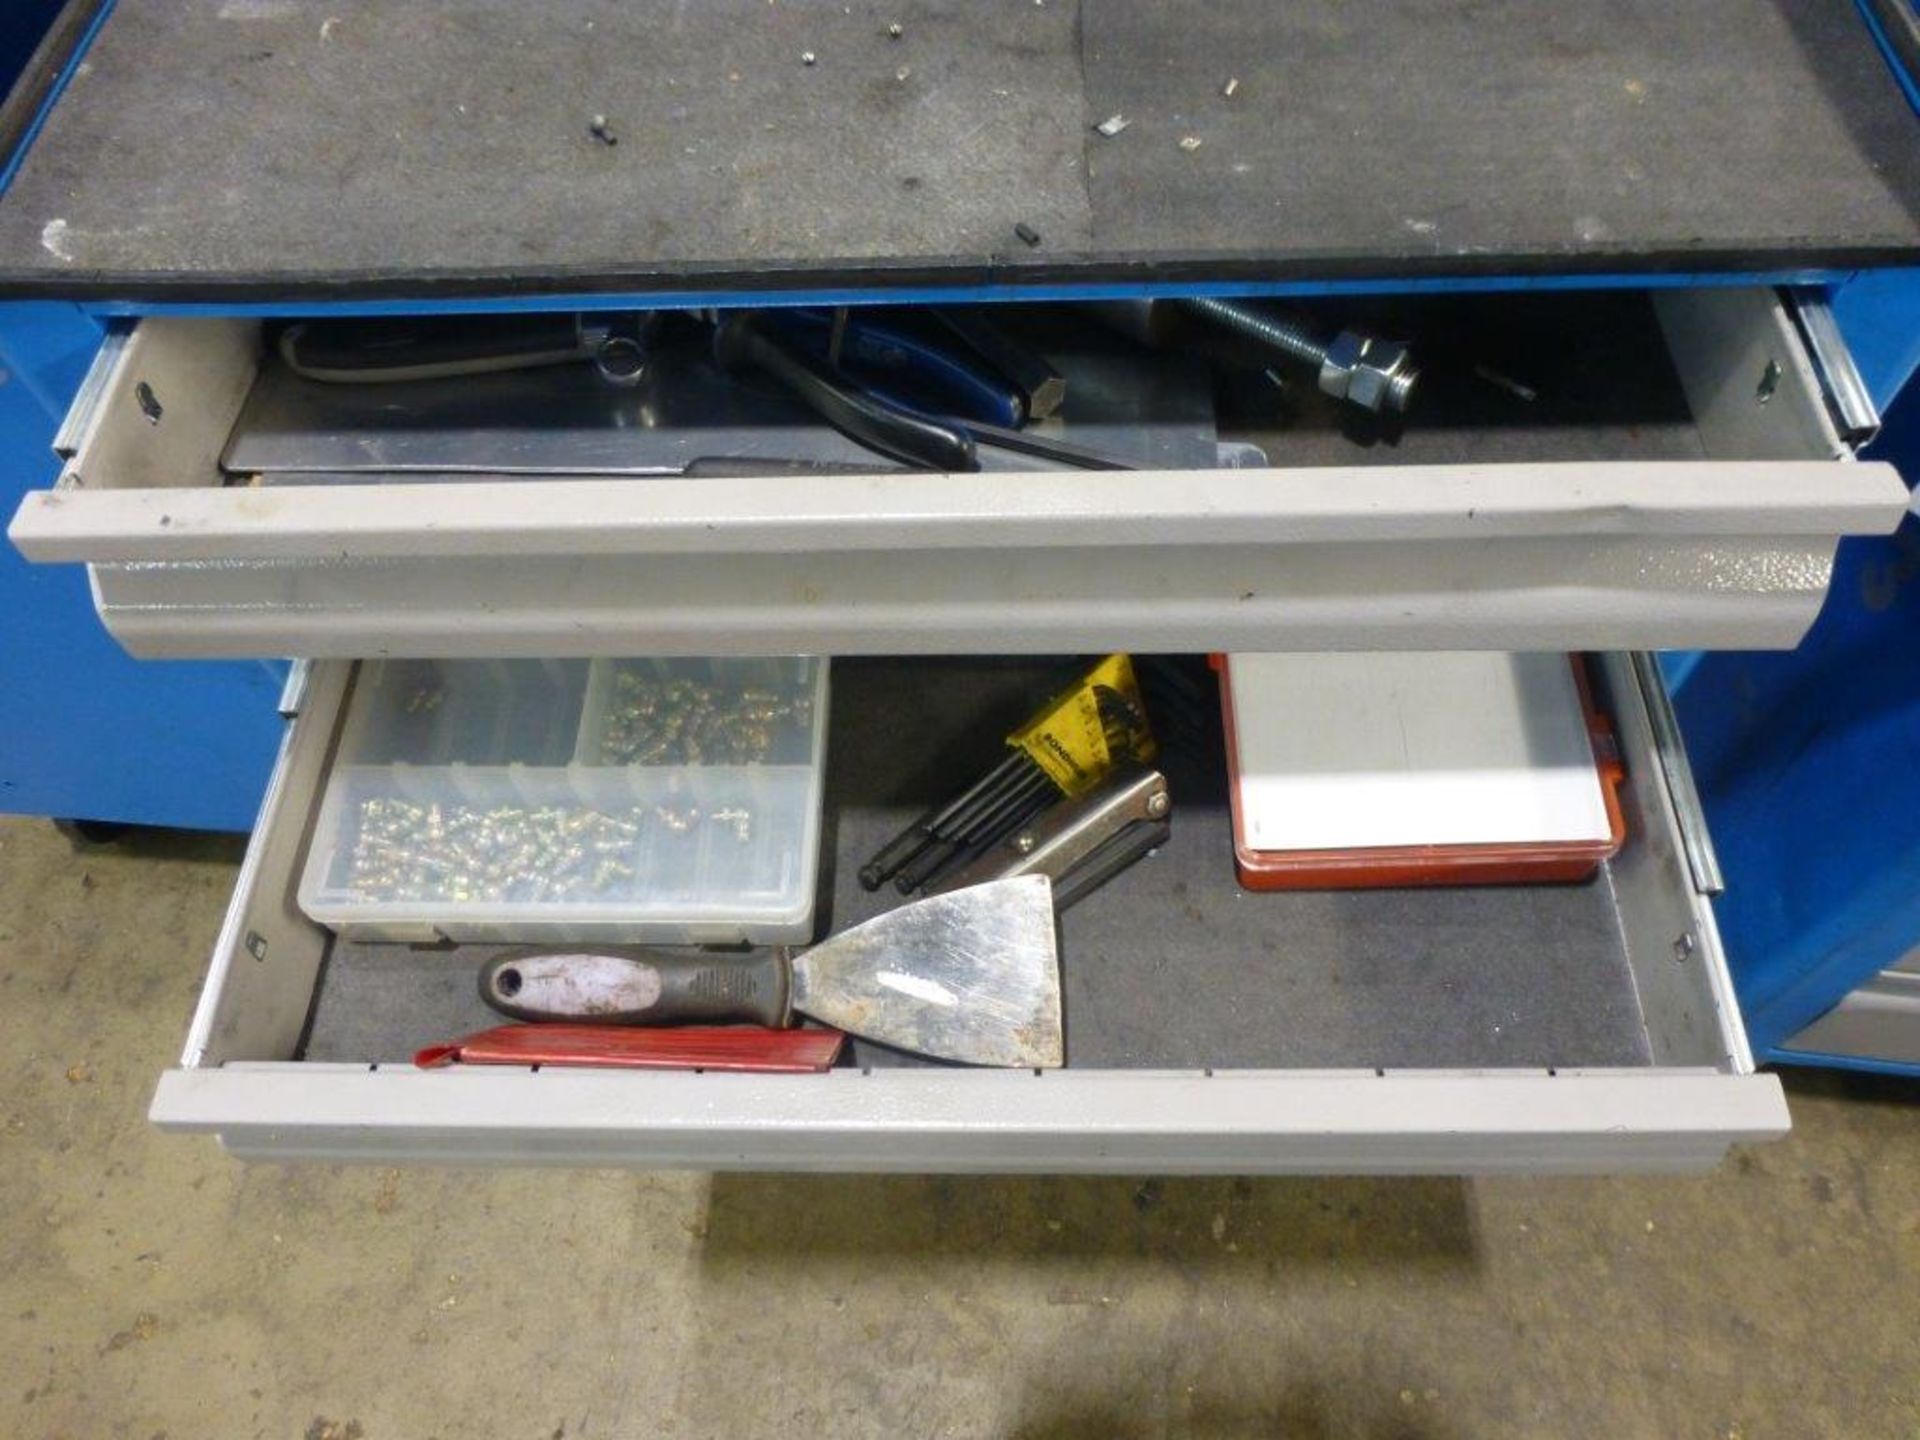 Unior Eurostyle 6 drawer tool cabinet and contents, mainly hand tools and components - Image 2 of 2